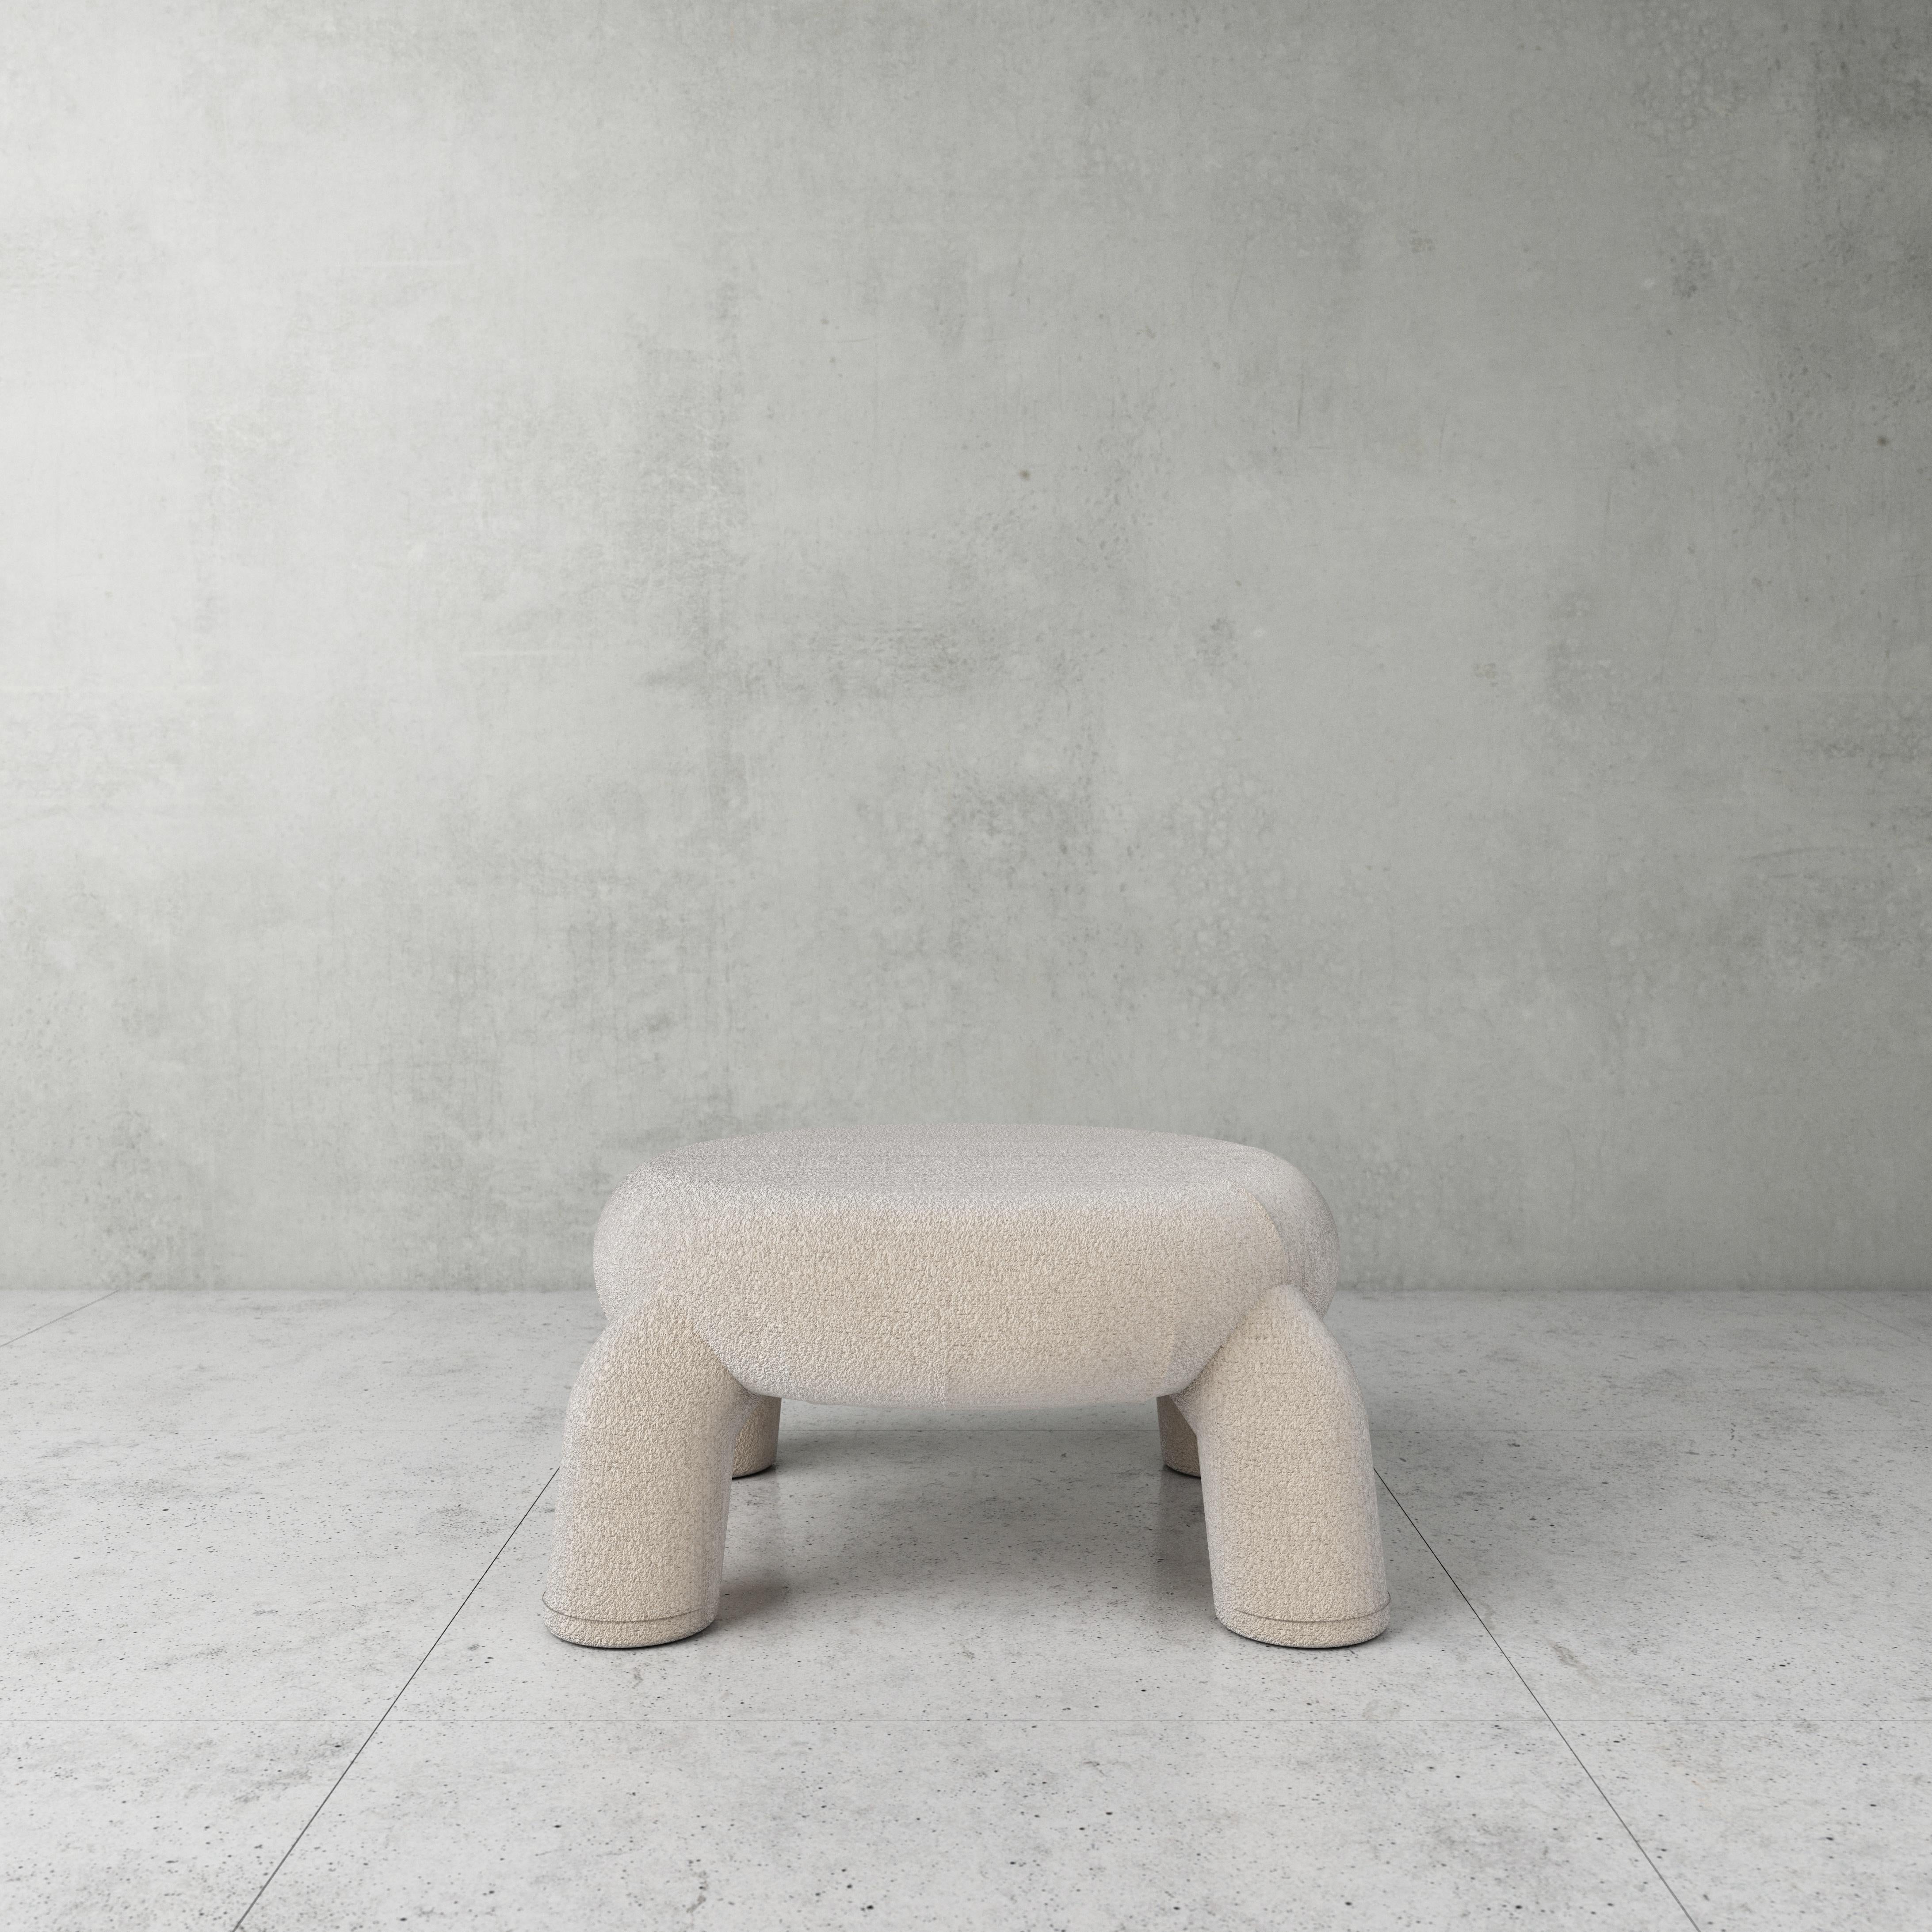 Khelone ottoman by Pietro Franceschini
Sold exclusively by Galerie Philia
Manufacturer : Stefano Minotti
Dimensions: W 79 x H 42 cm
Materials: Lamb

Available in Bouclé

Pietro Franceschini is an architect and designer based in New York and